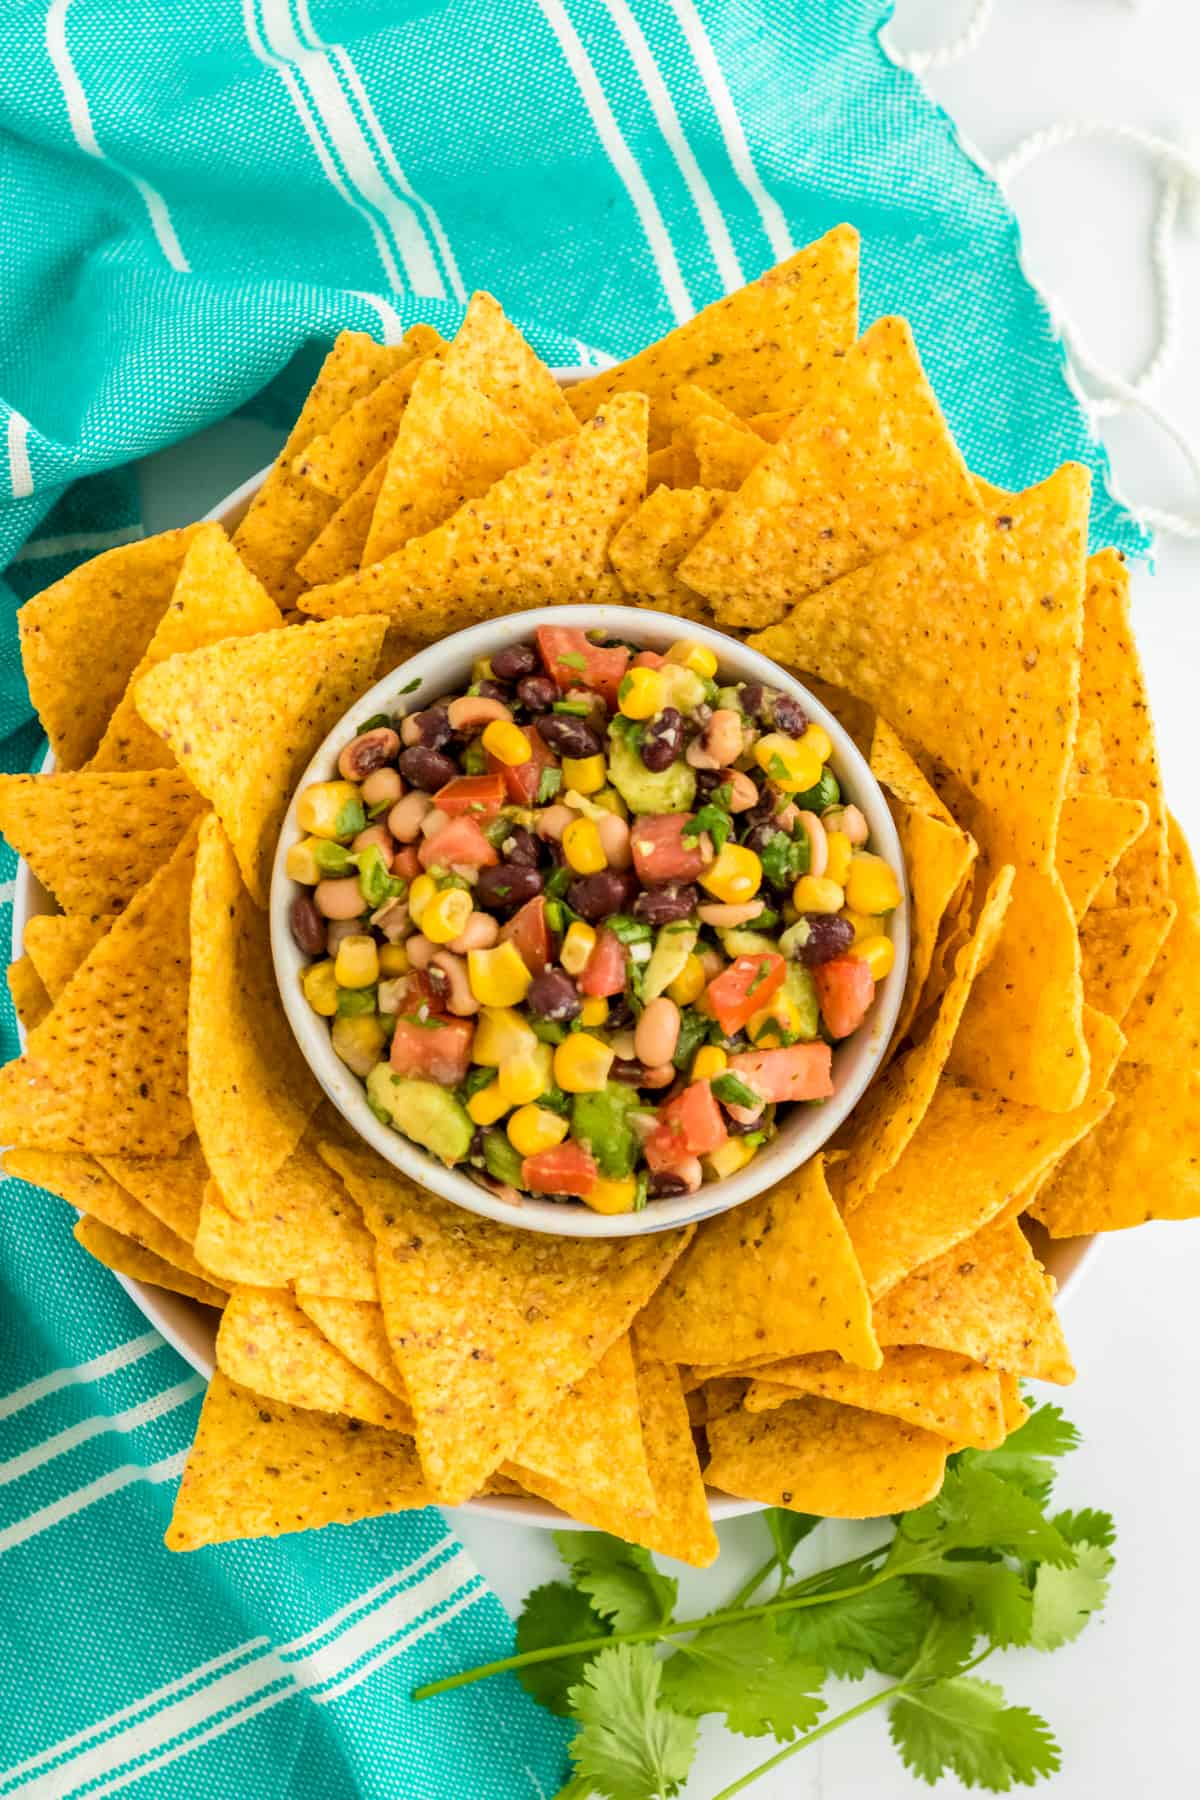 Cowboy Caviar Dip in a bowl surrounded by tortilla chips